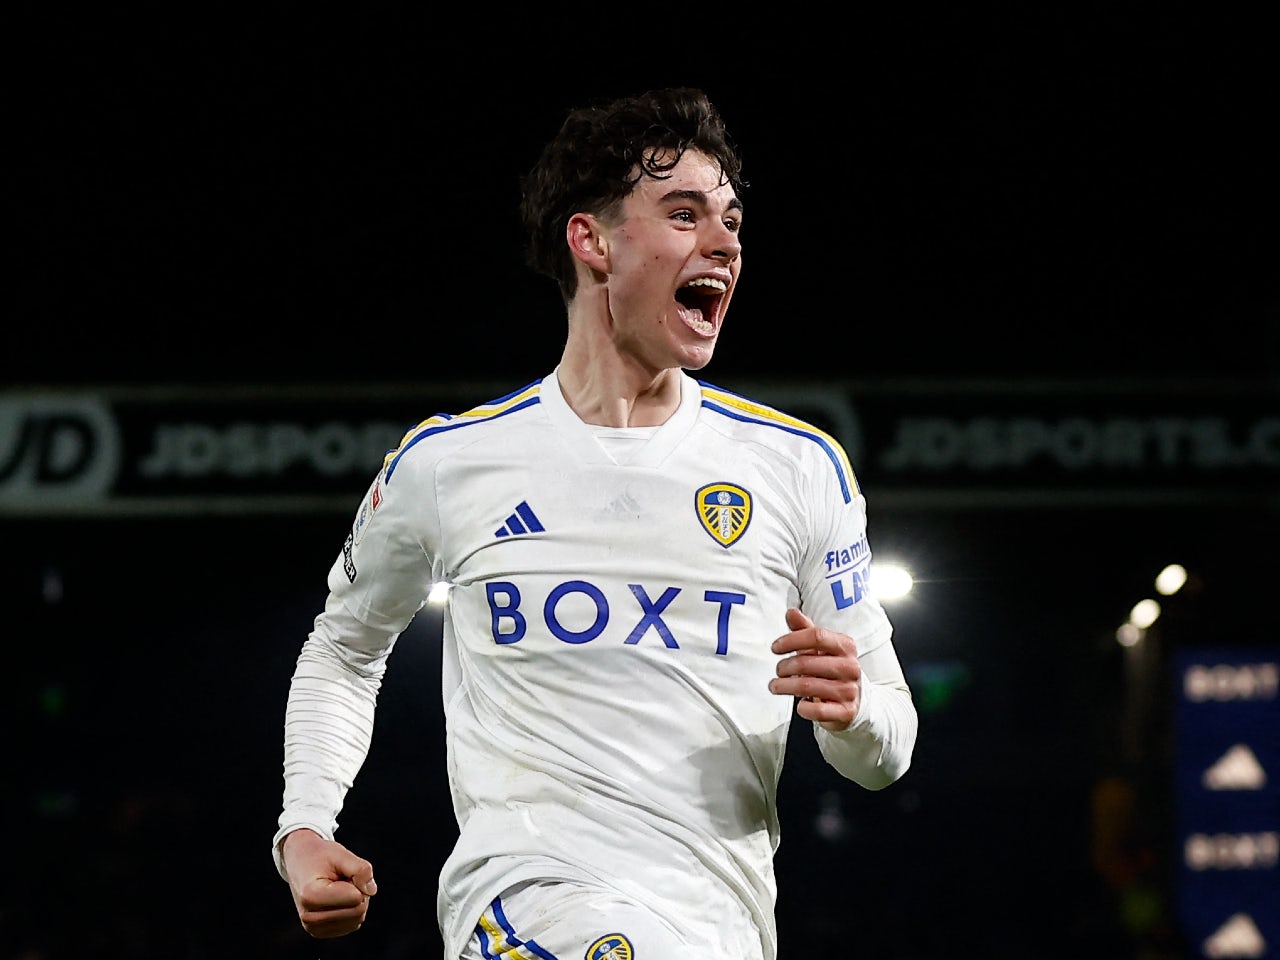 Tottenham Hotspur announce Archie Gray signing as Joe Rodon completes Leeds move